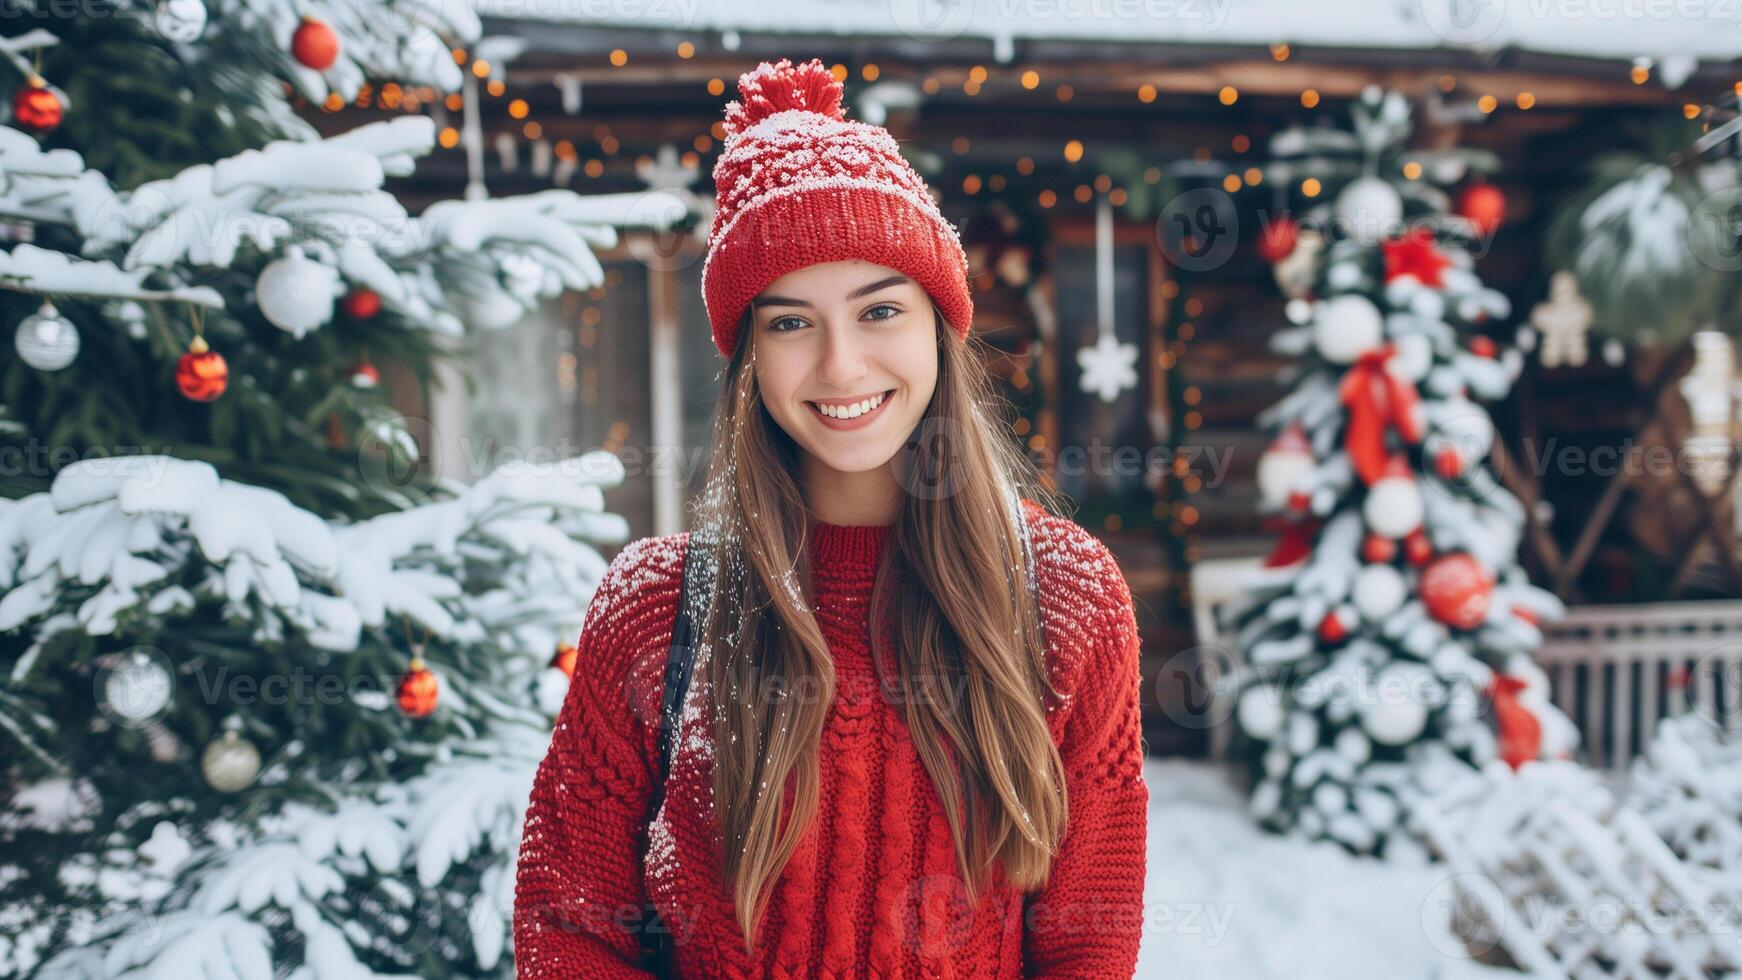 Portrait of a beautiful young woman in a red sweater and hat on the background of a Christmas tree. photo